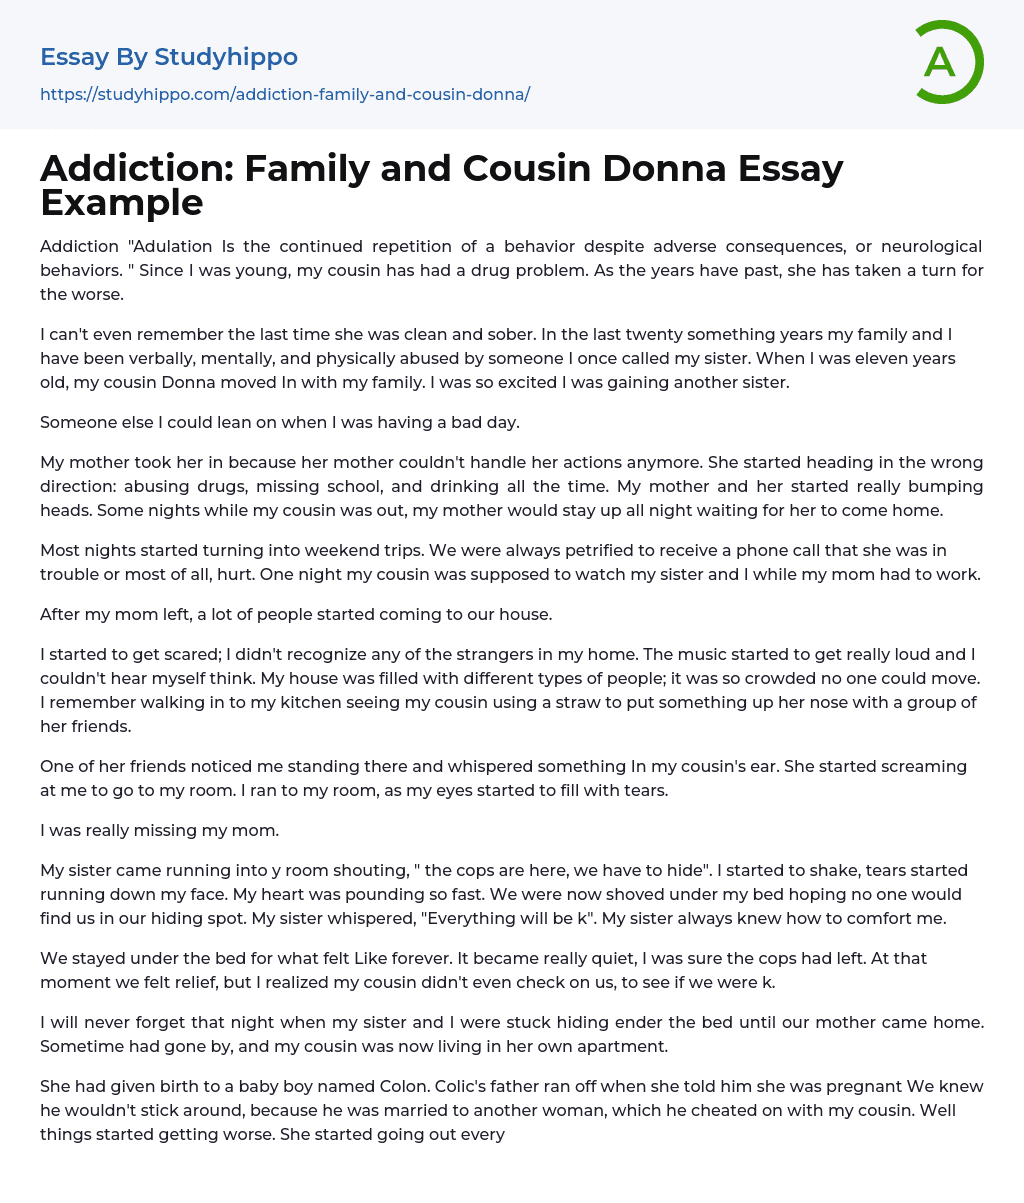 Addiction: Family and Cousin Donna Essay Example